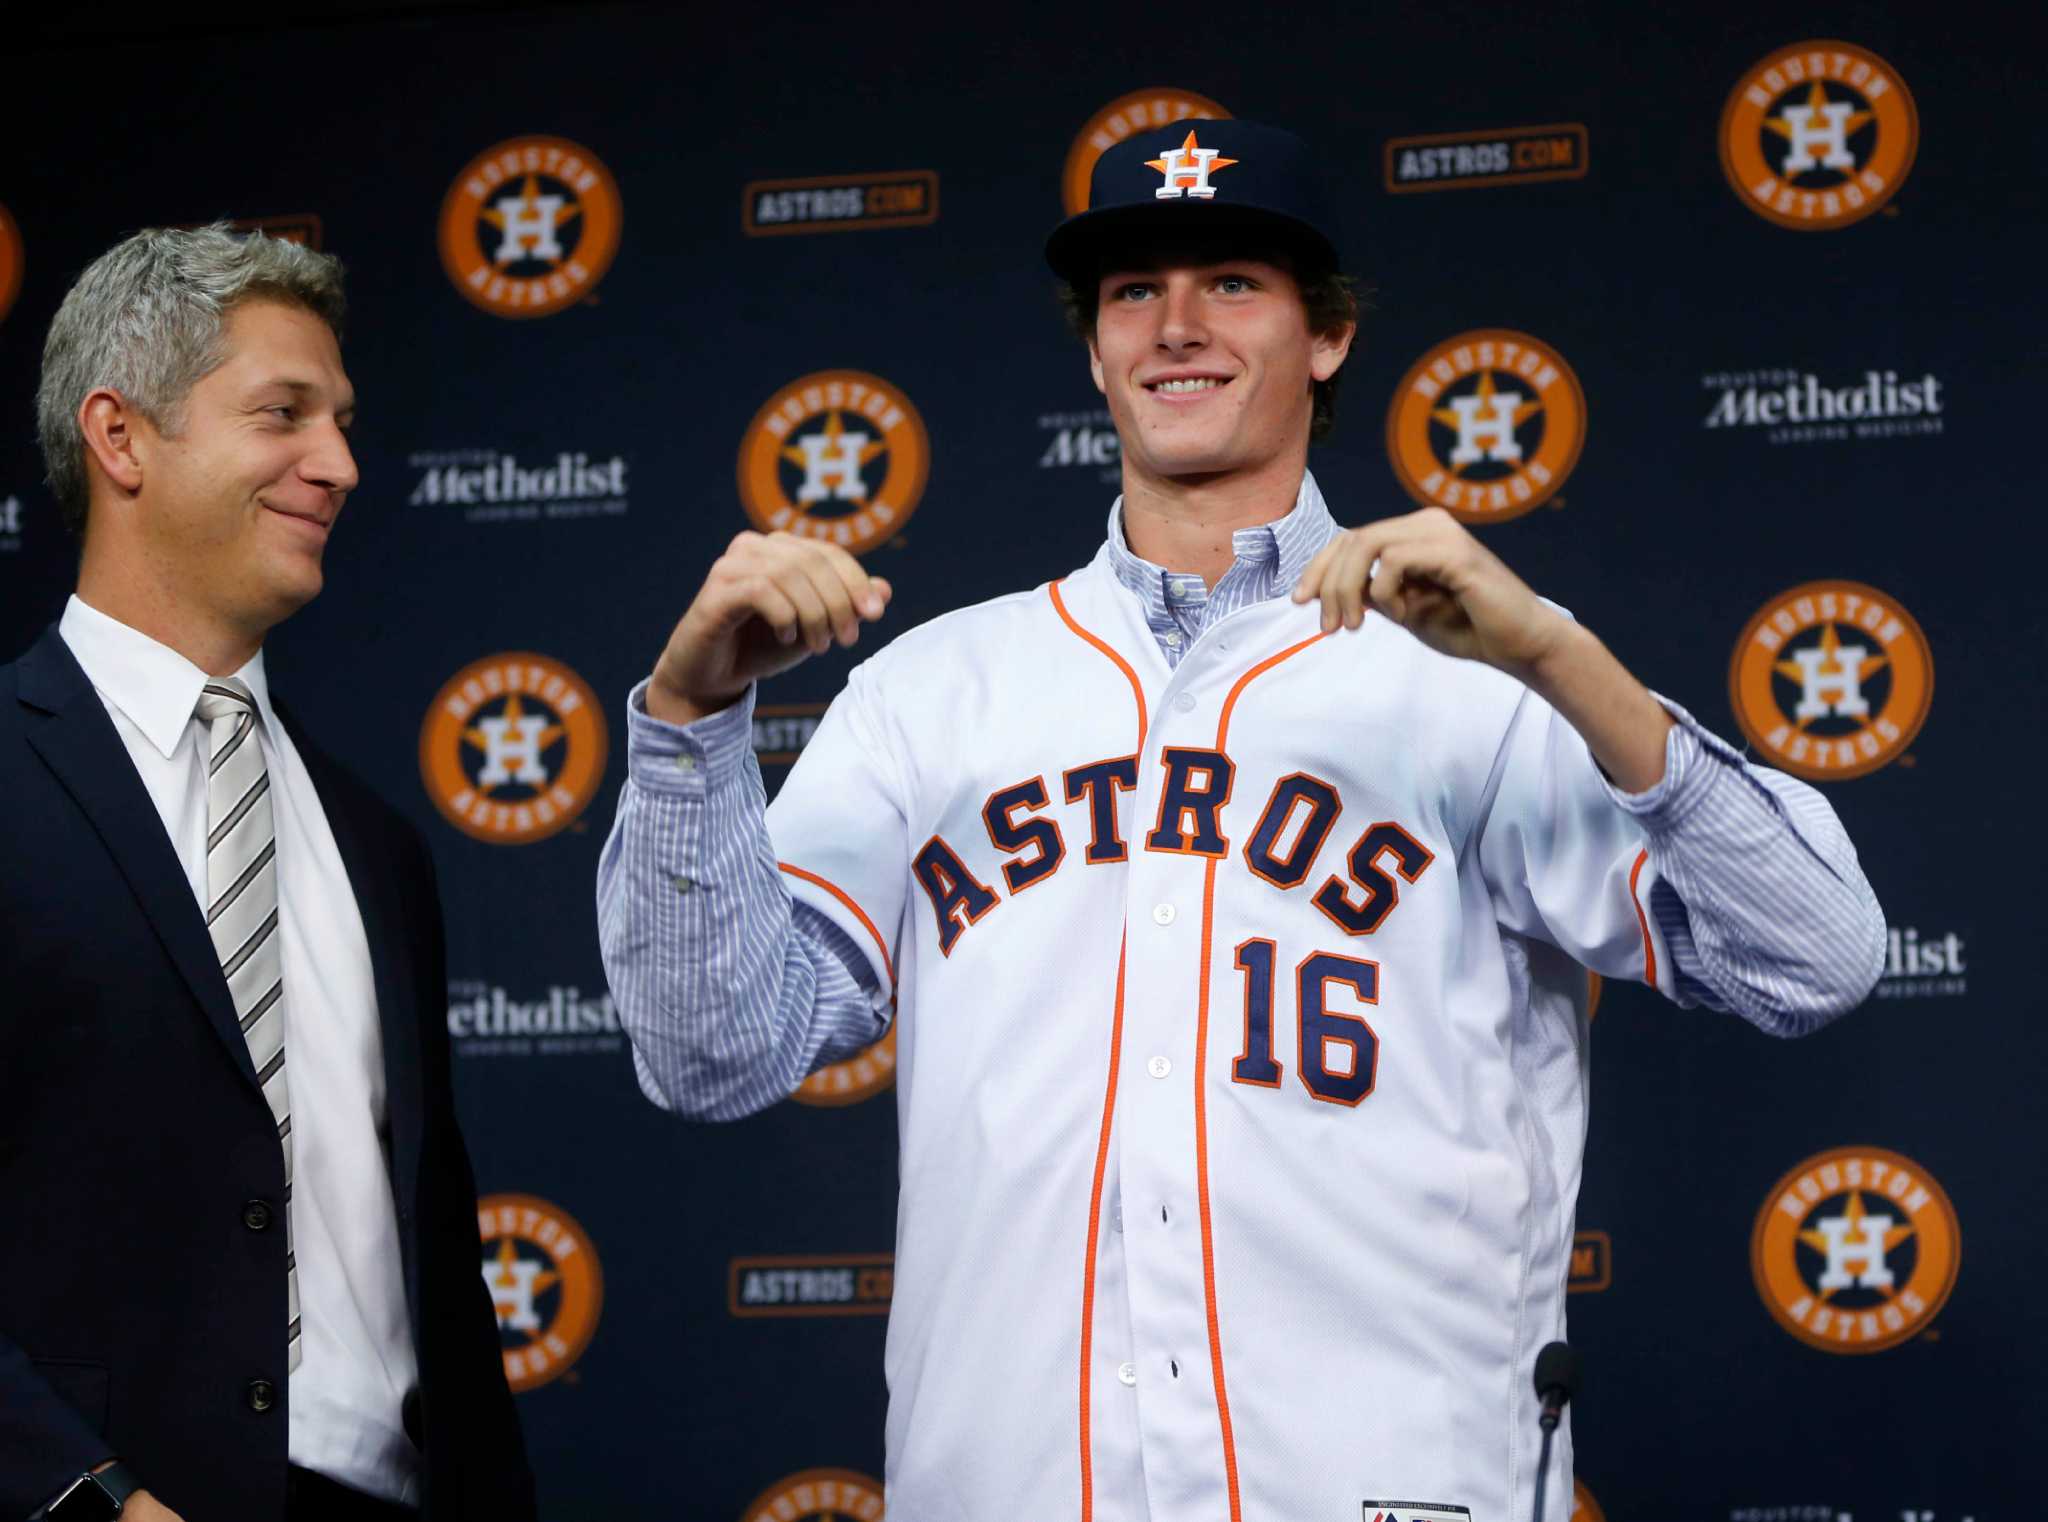 Astros' World Series roster still features Orioles GM Mike Elias